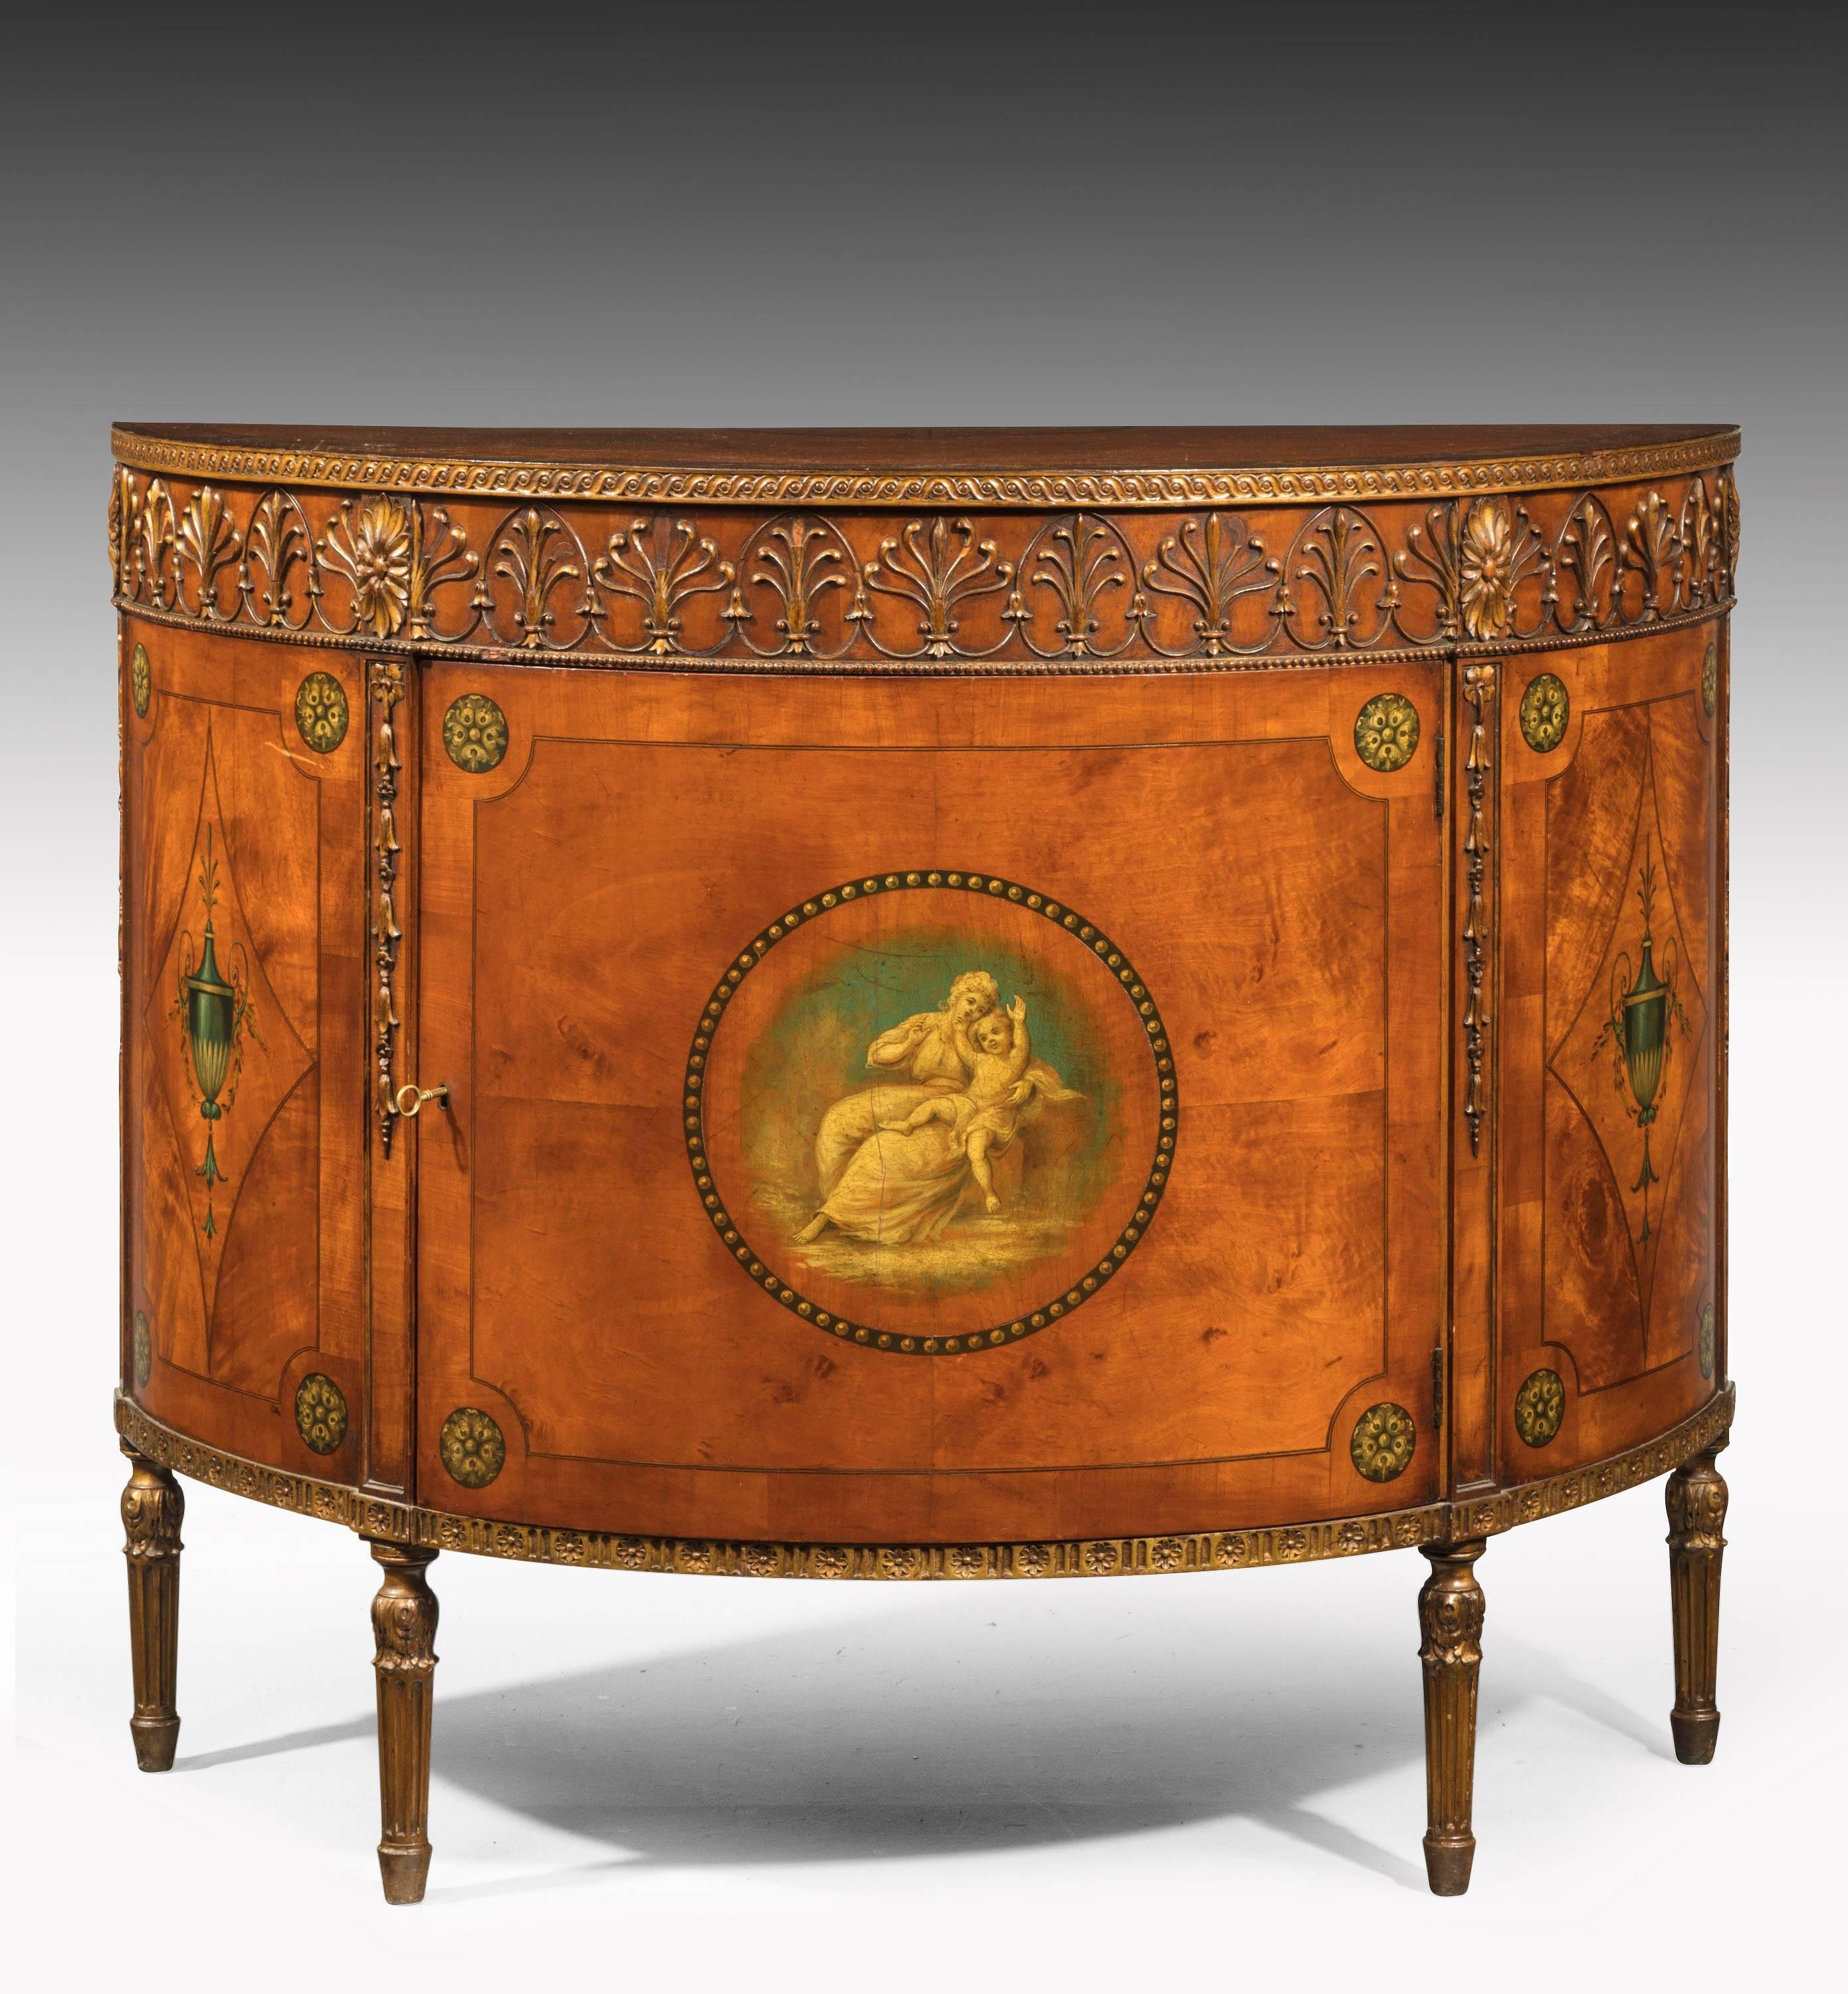 A fine pair of Sheraton style satinwood demilune Commodes. The top border beautifully carved with anthemion’s. The top edging painted and decorated retaining the original colors. The central motif of a neoclassical maiden with a child.